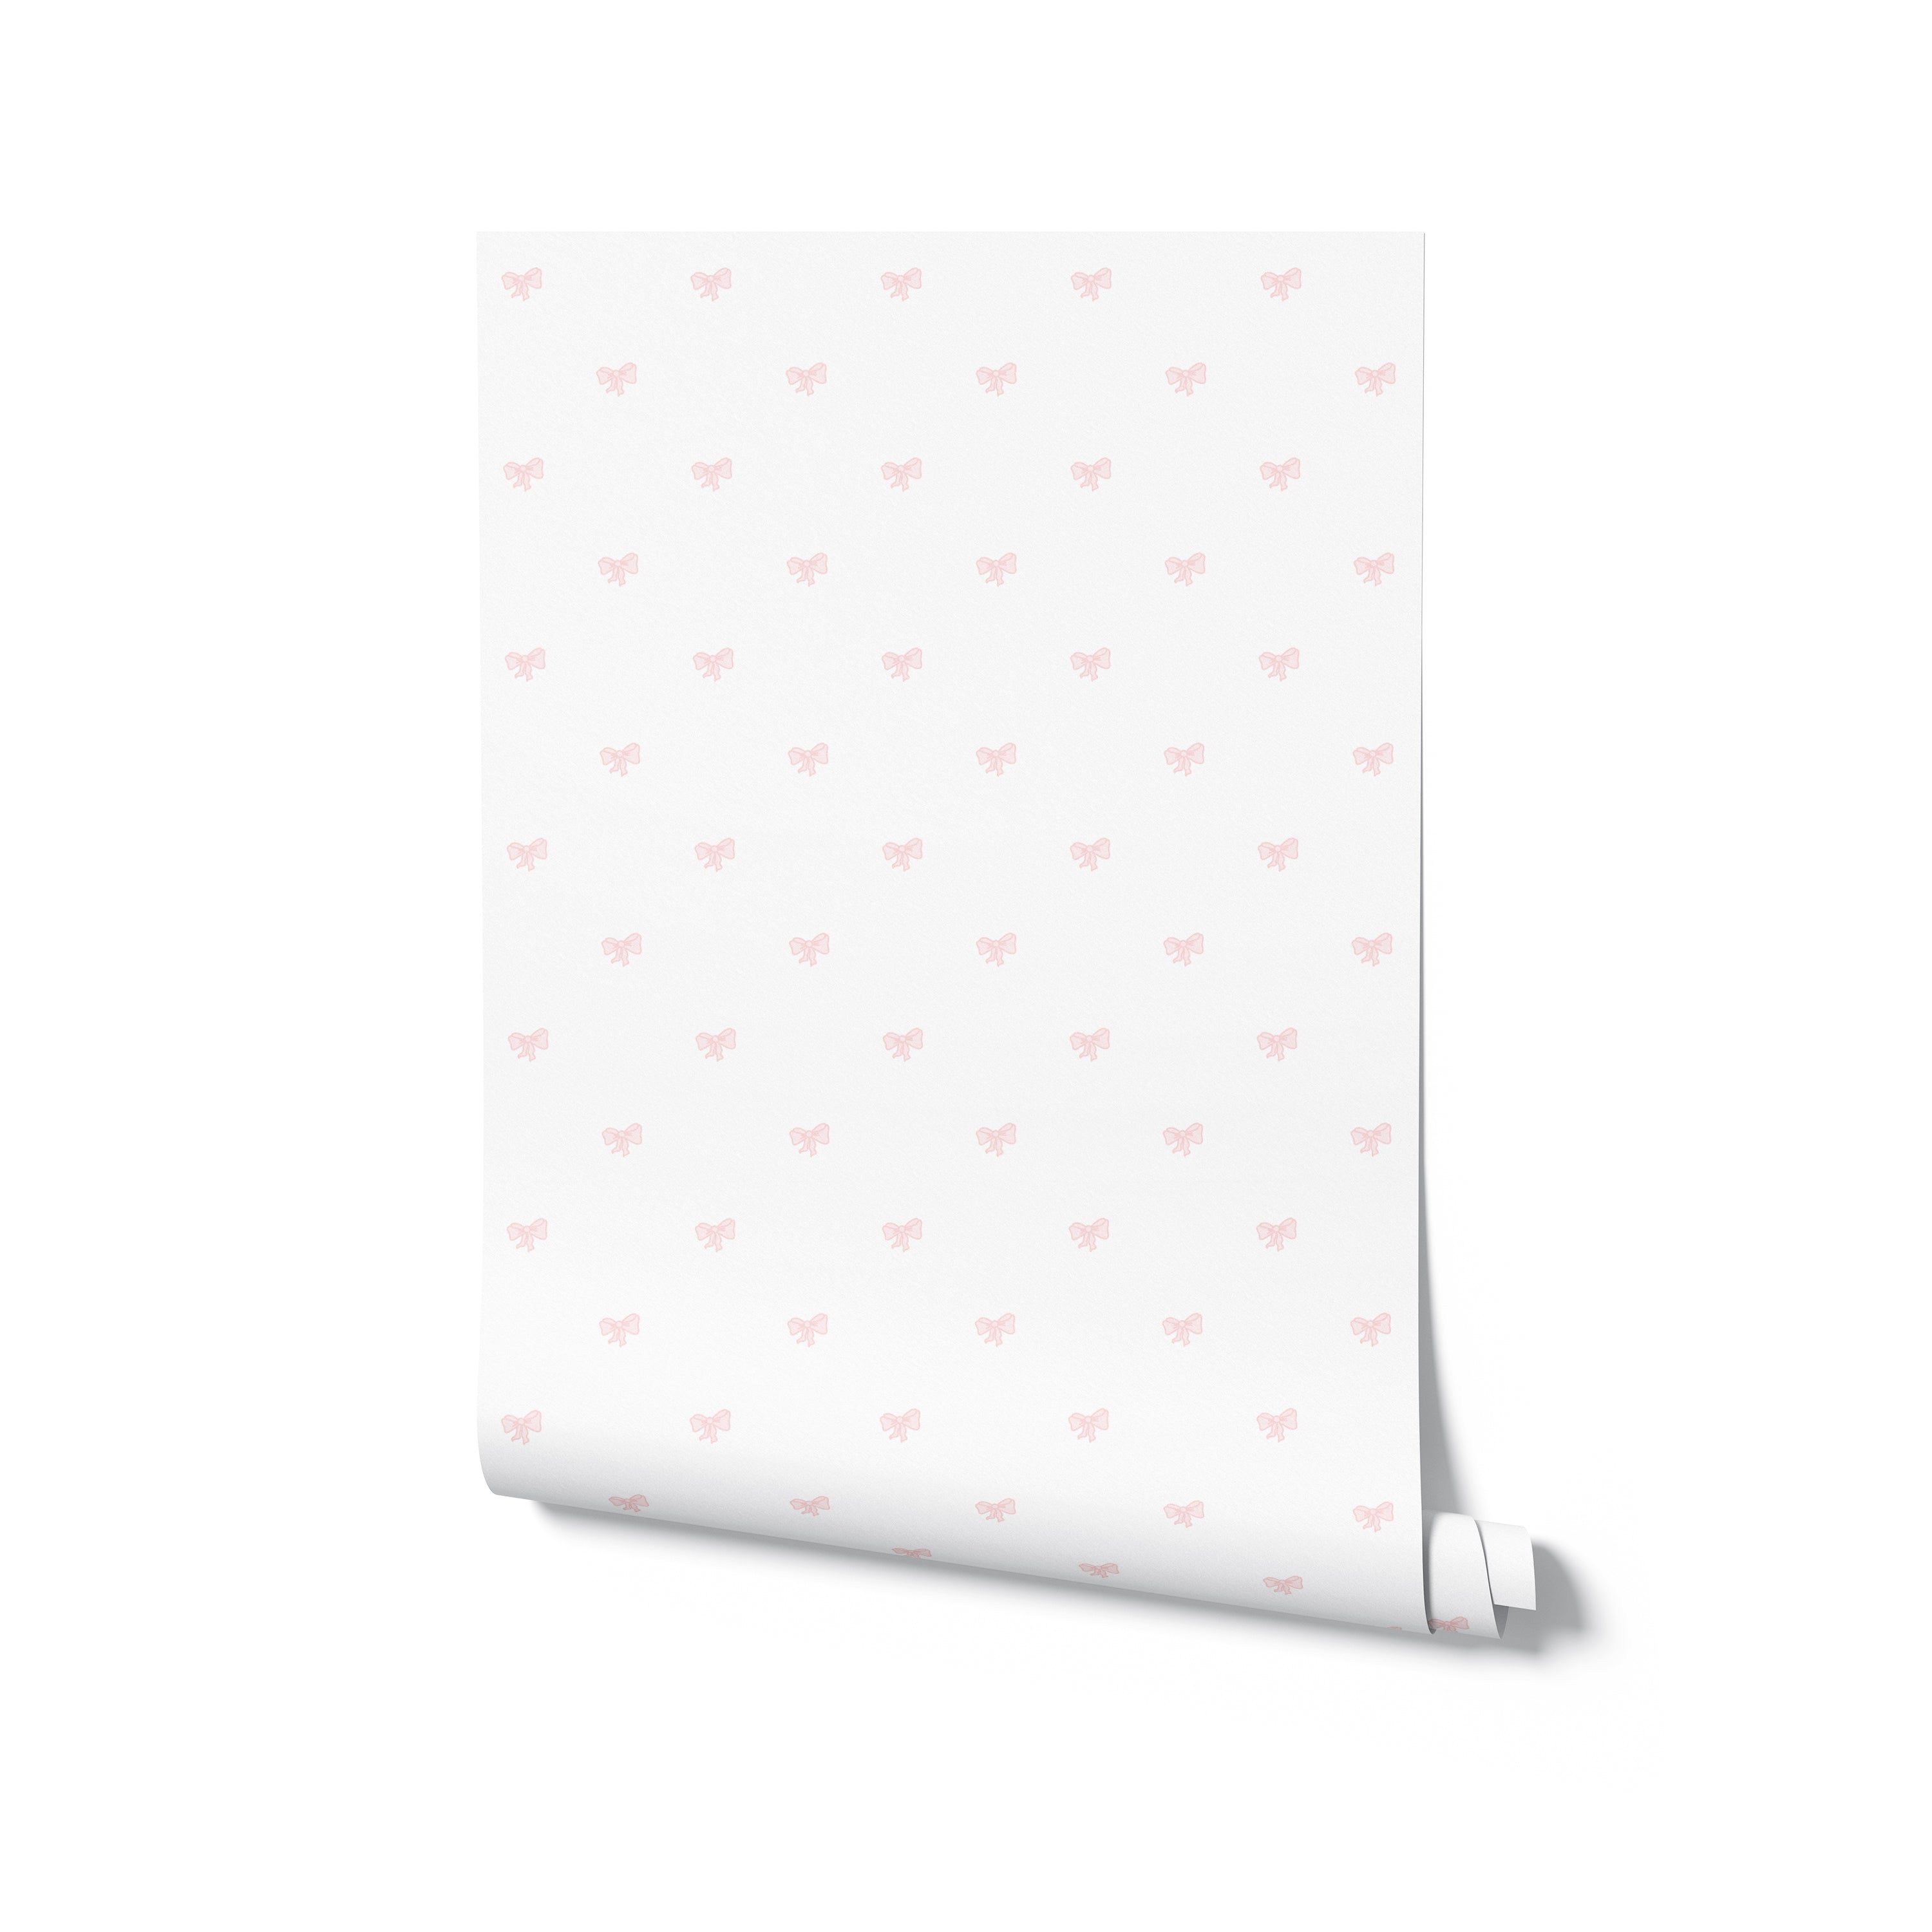 A roll of Tiny Bows Wallpaper illustrating the light cream base adorned with tiny pink bows, perfect for adding a touch of sweetness and elegance to spaces designed for relaxation and joy